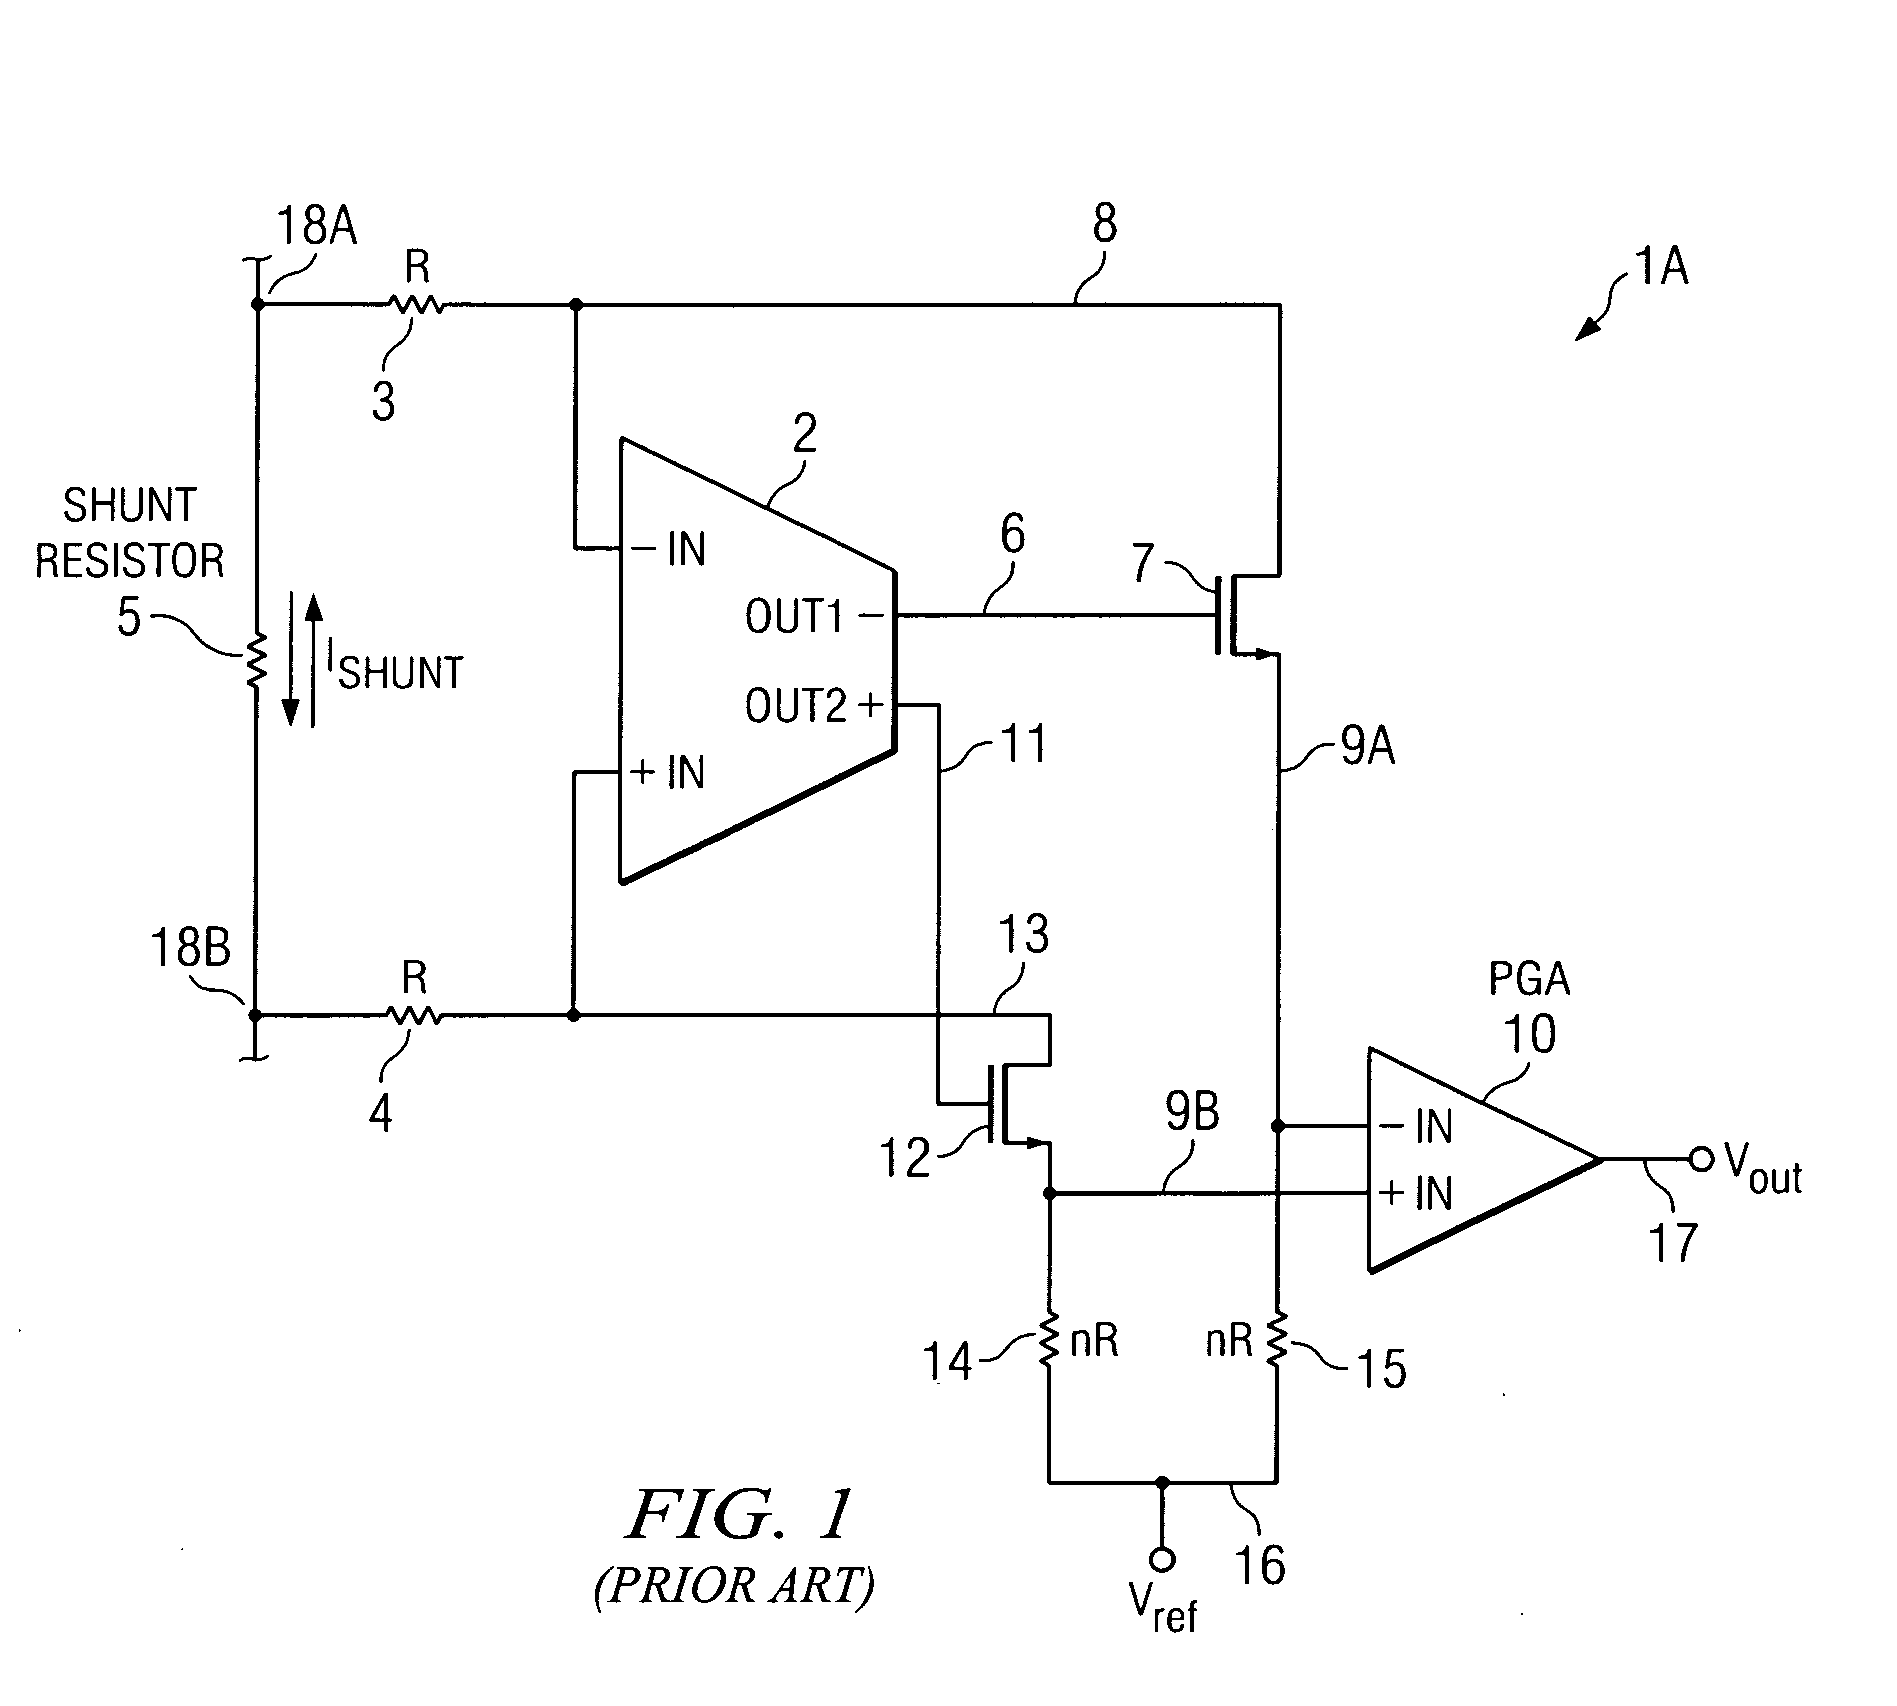 High-voltage differential amplifier and method using low voltage amplifier and dynamic voltage selection